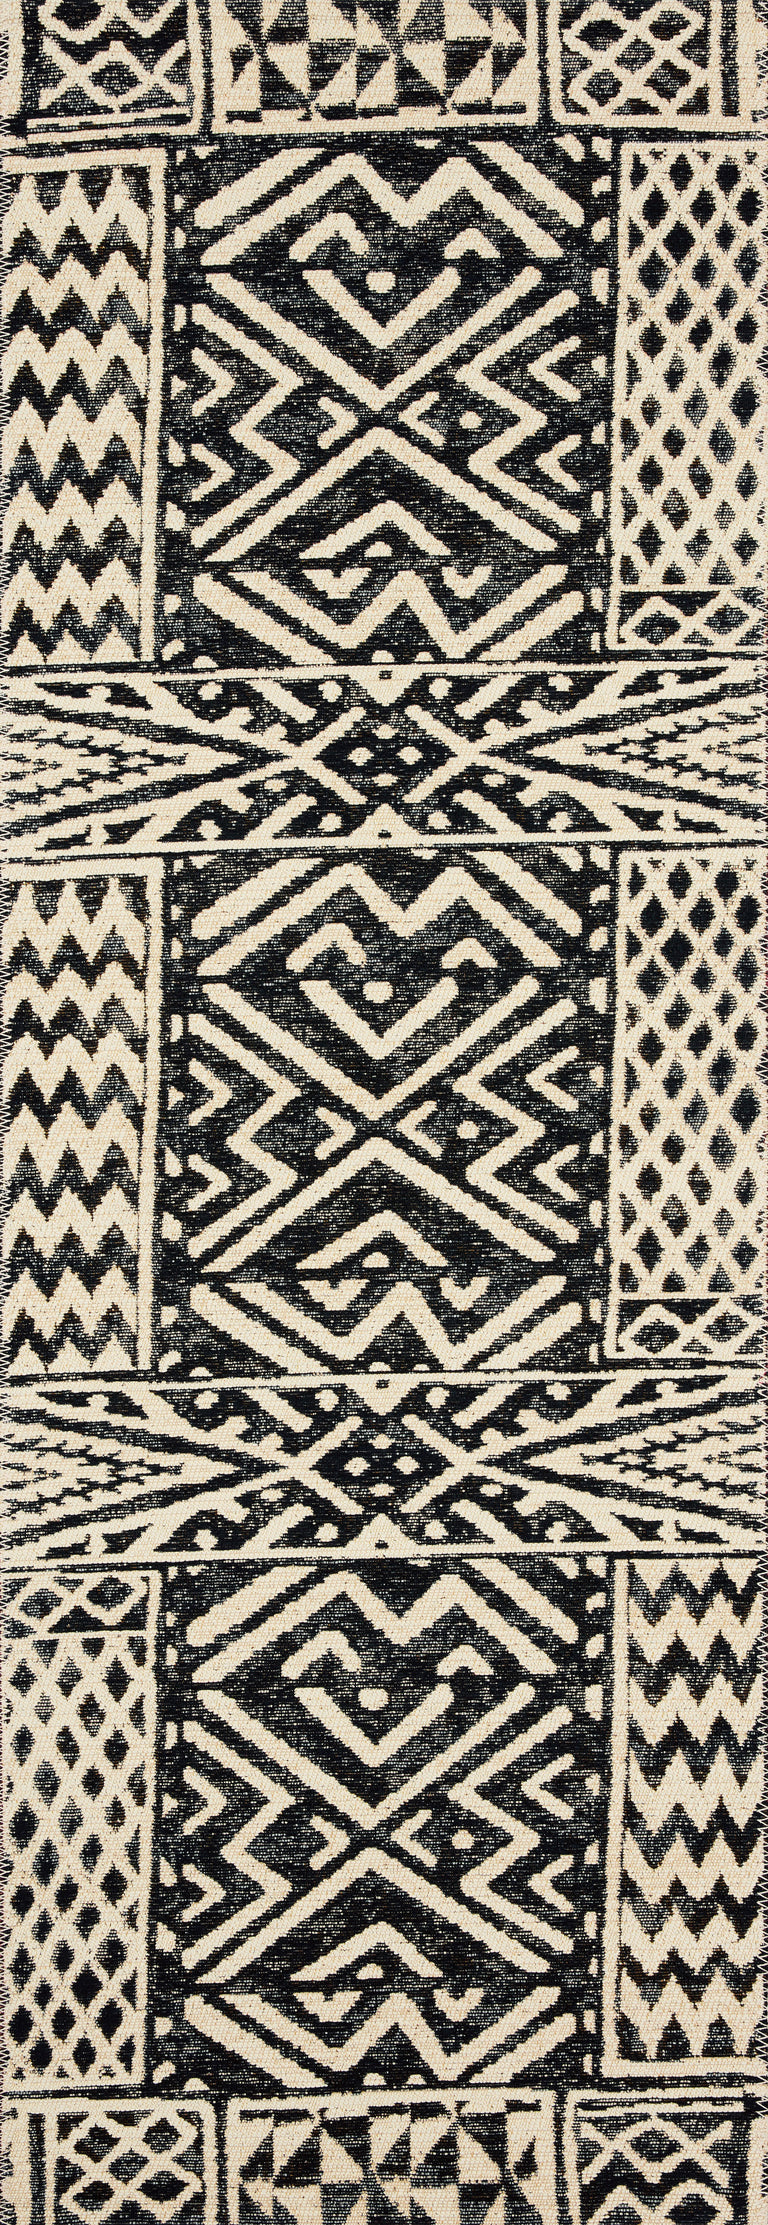 Loloi Rugs Mika Collection Rug in Ivory, Black - 10'6" x 13'9"